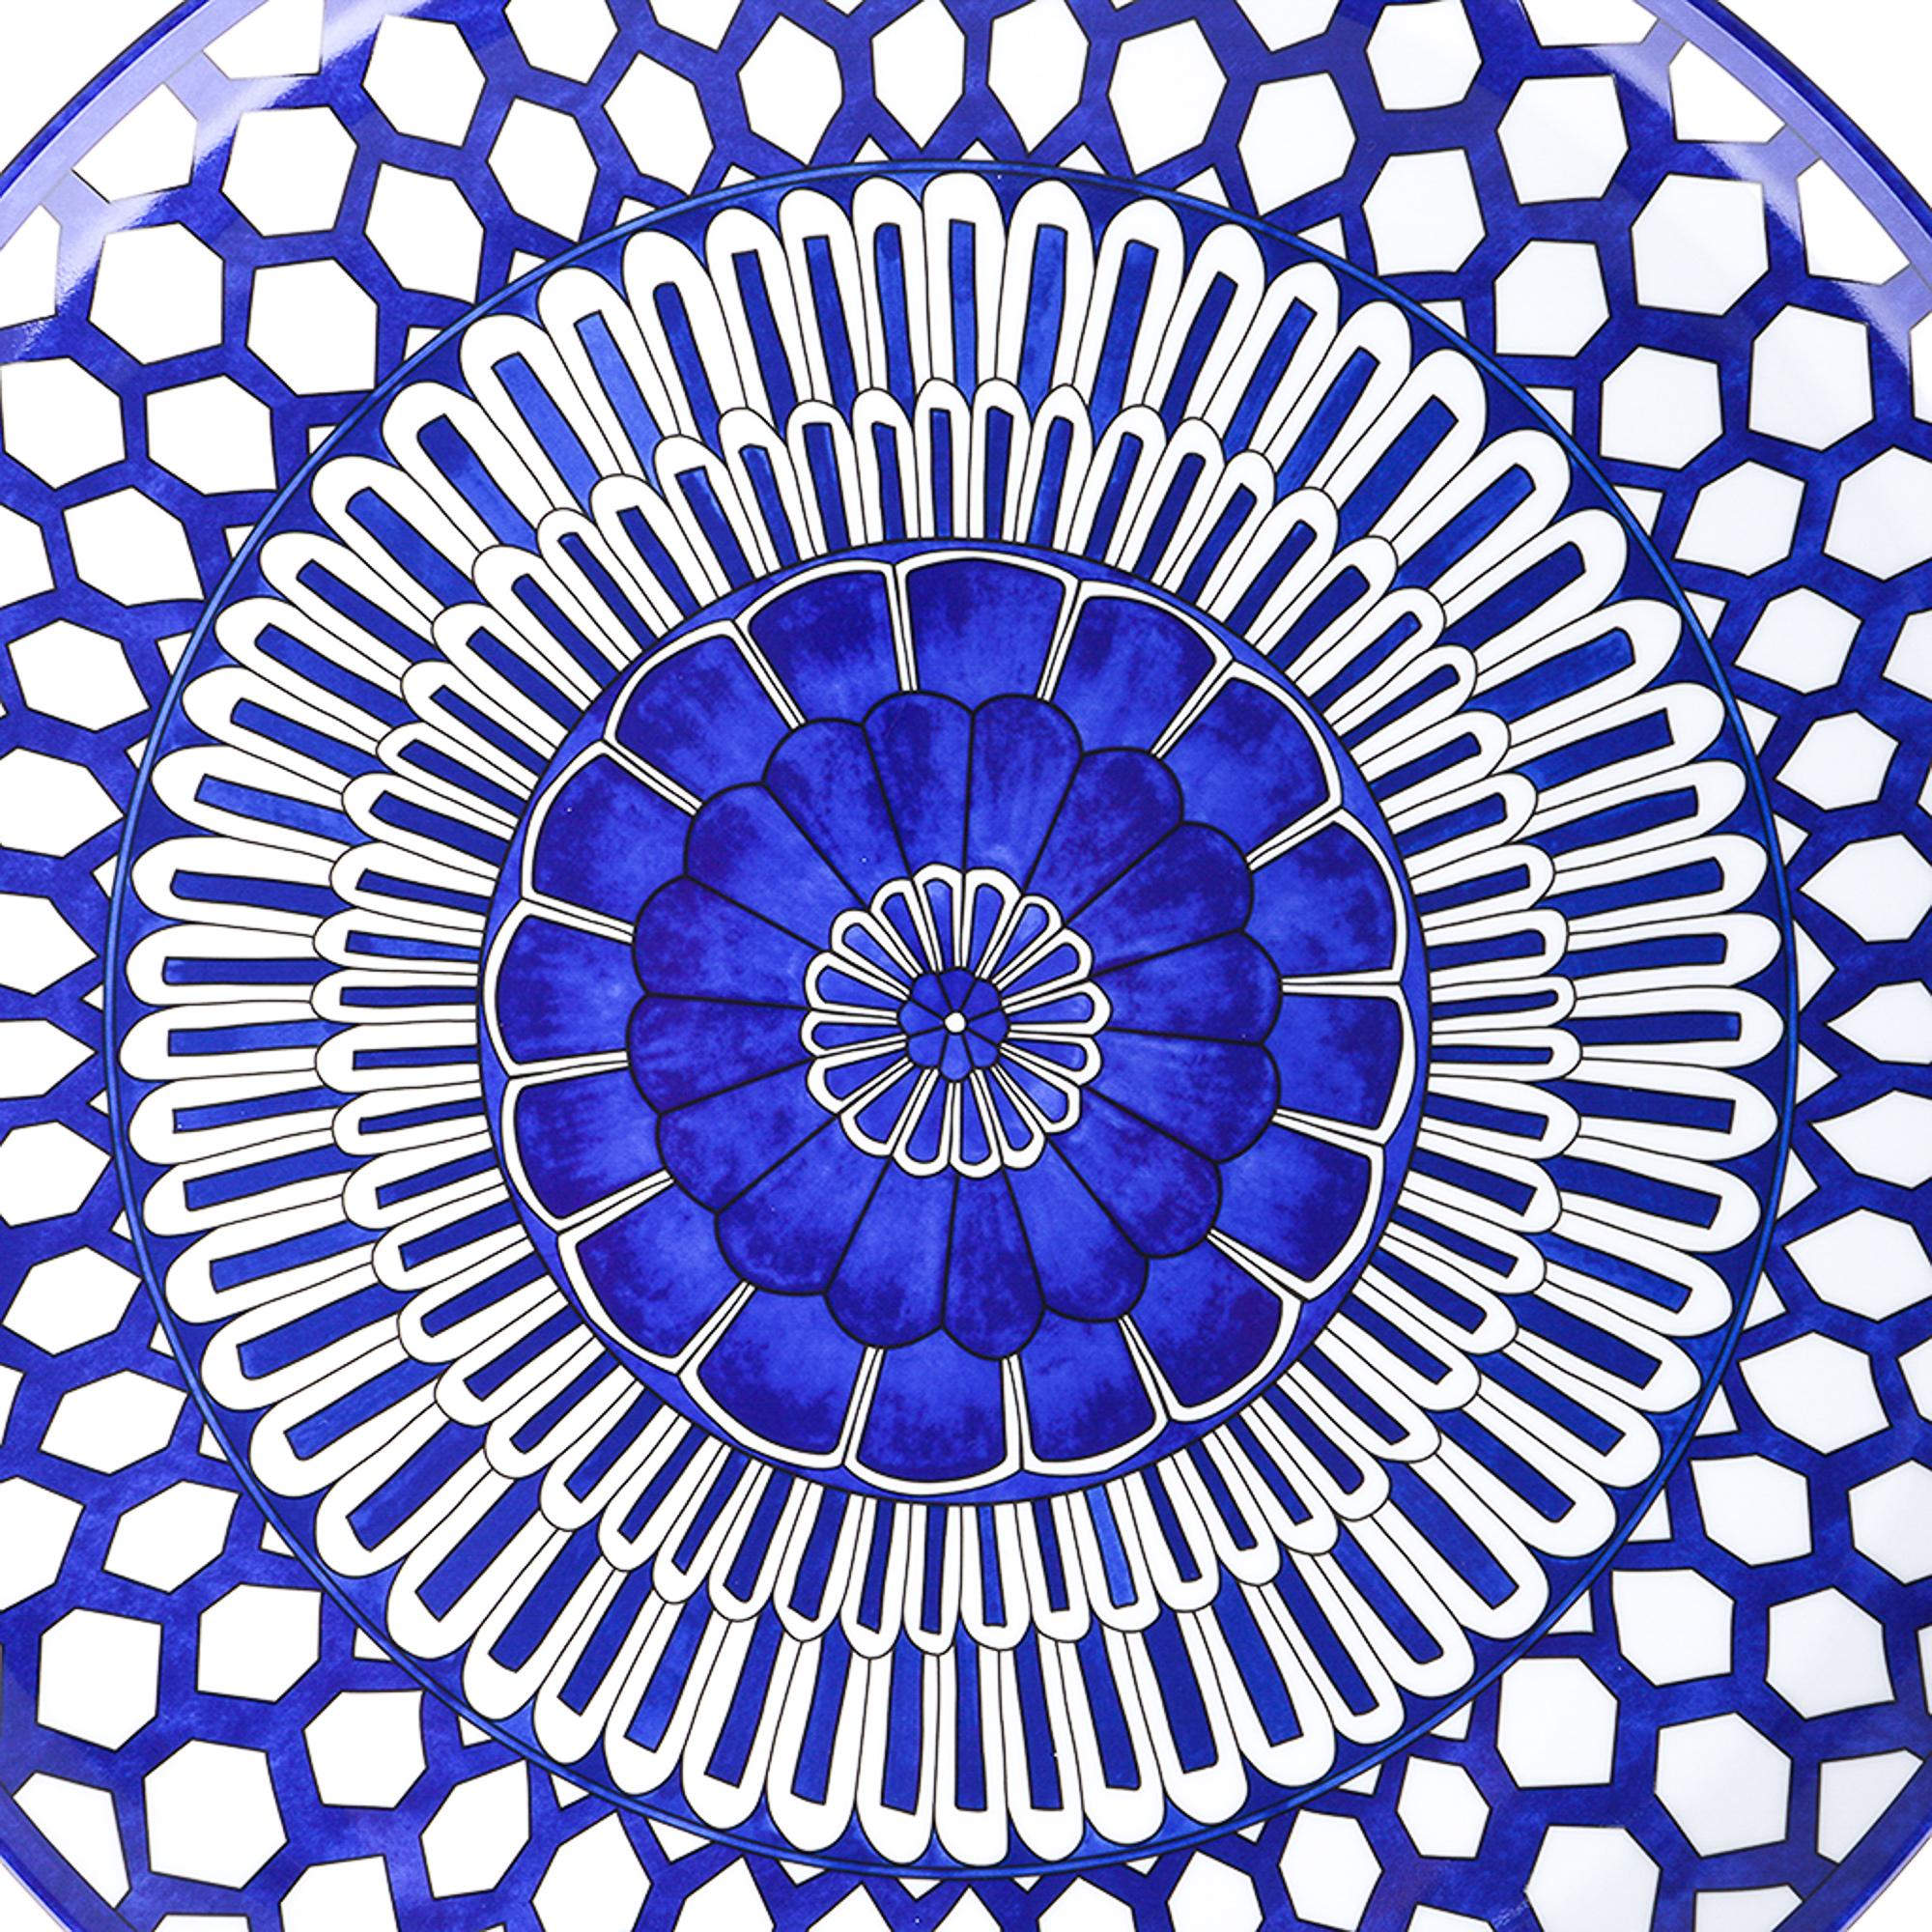 Mightychic offers an Hermes Large Round Platter featured in Bleus d'Allieurs.
A mdoern interpertation of petals, blooms and honeycombs paying hommage to the countless sea voyages of
trade between Paris and Asia.
Inspired in traditional Ming